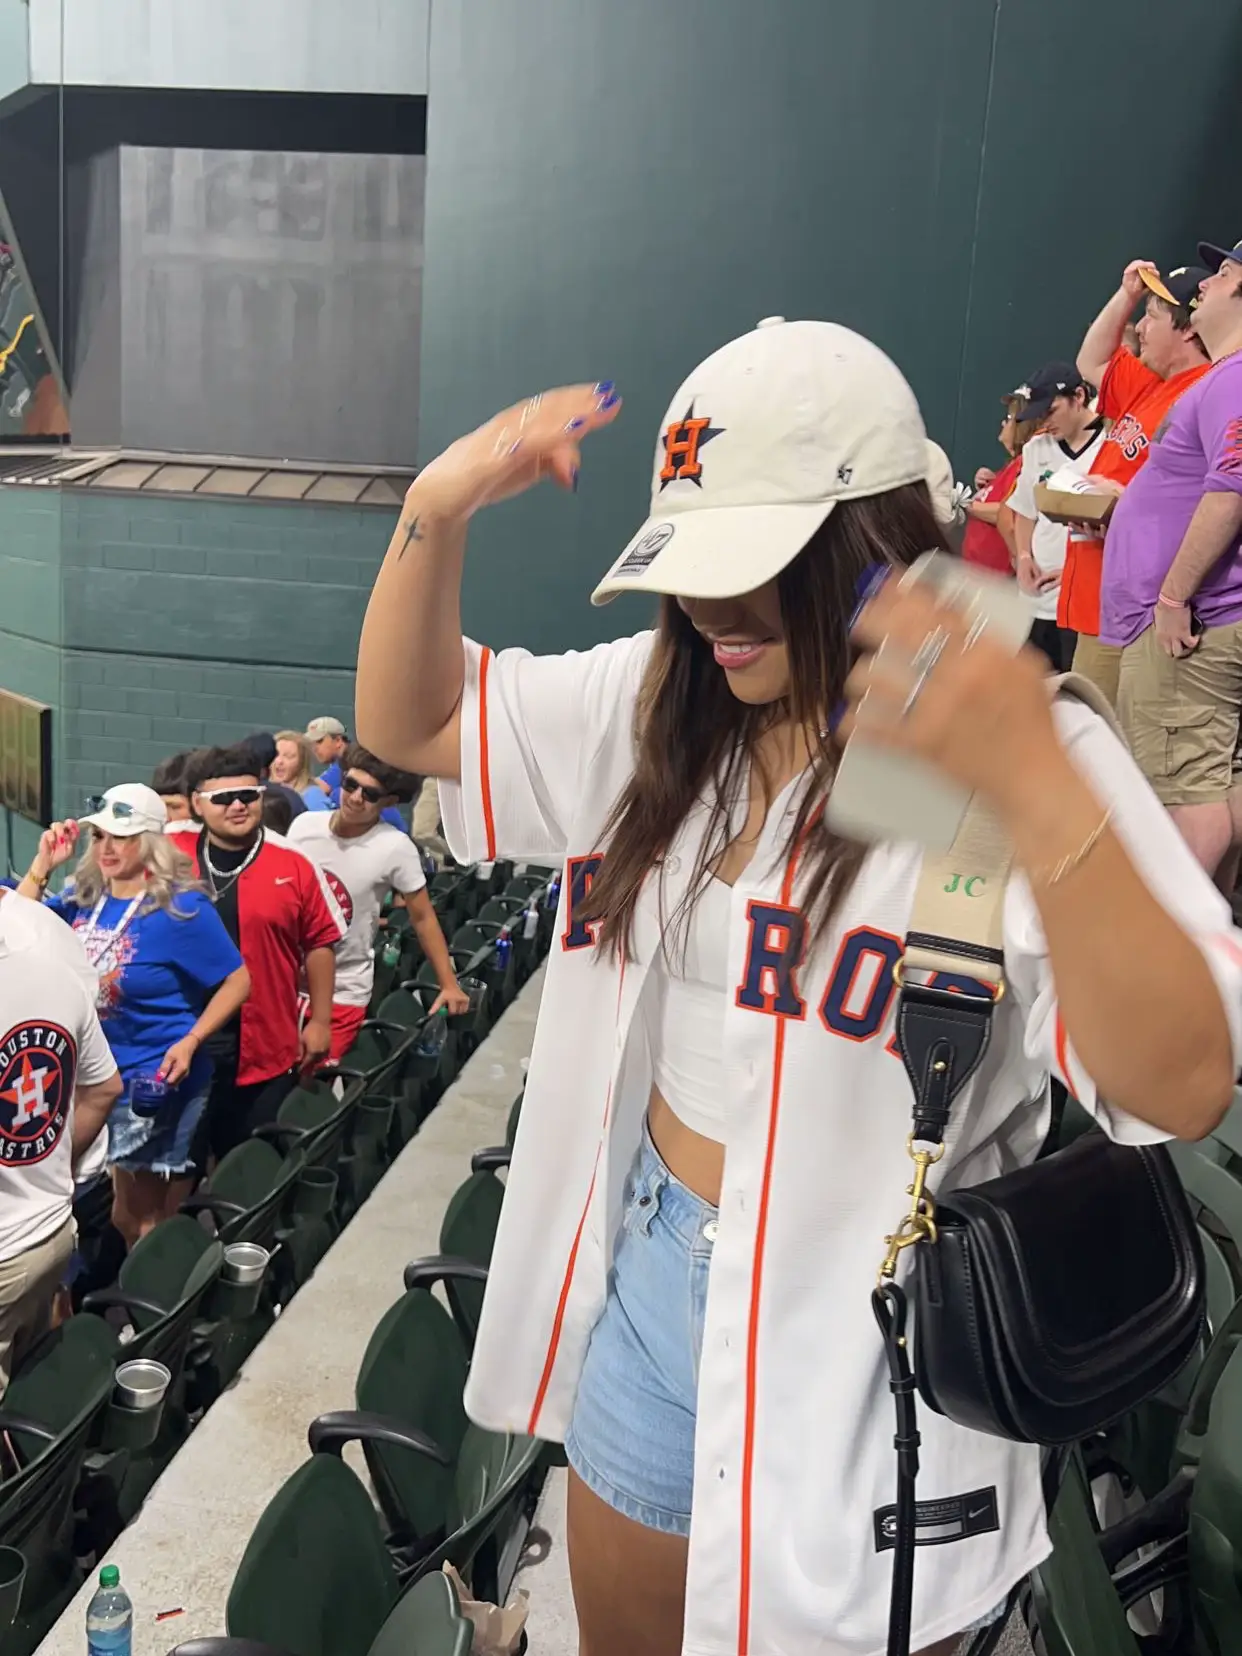 BASEBALL GAME OUTFIT & PIC INSPO, Gallery posted by Jayda Cisneros